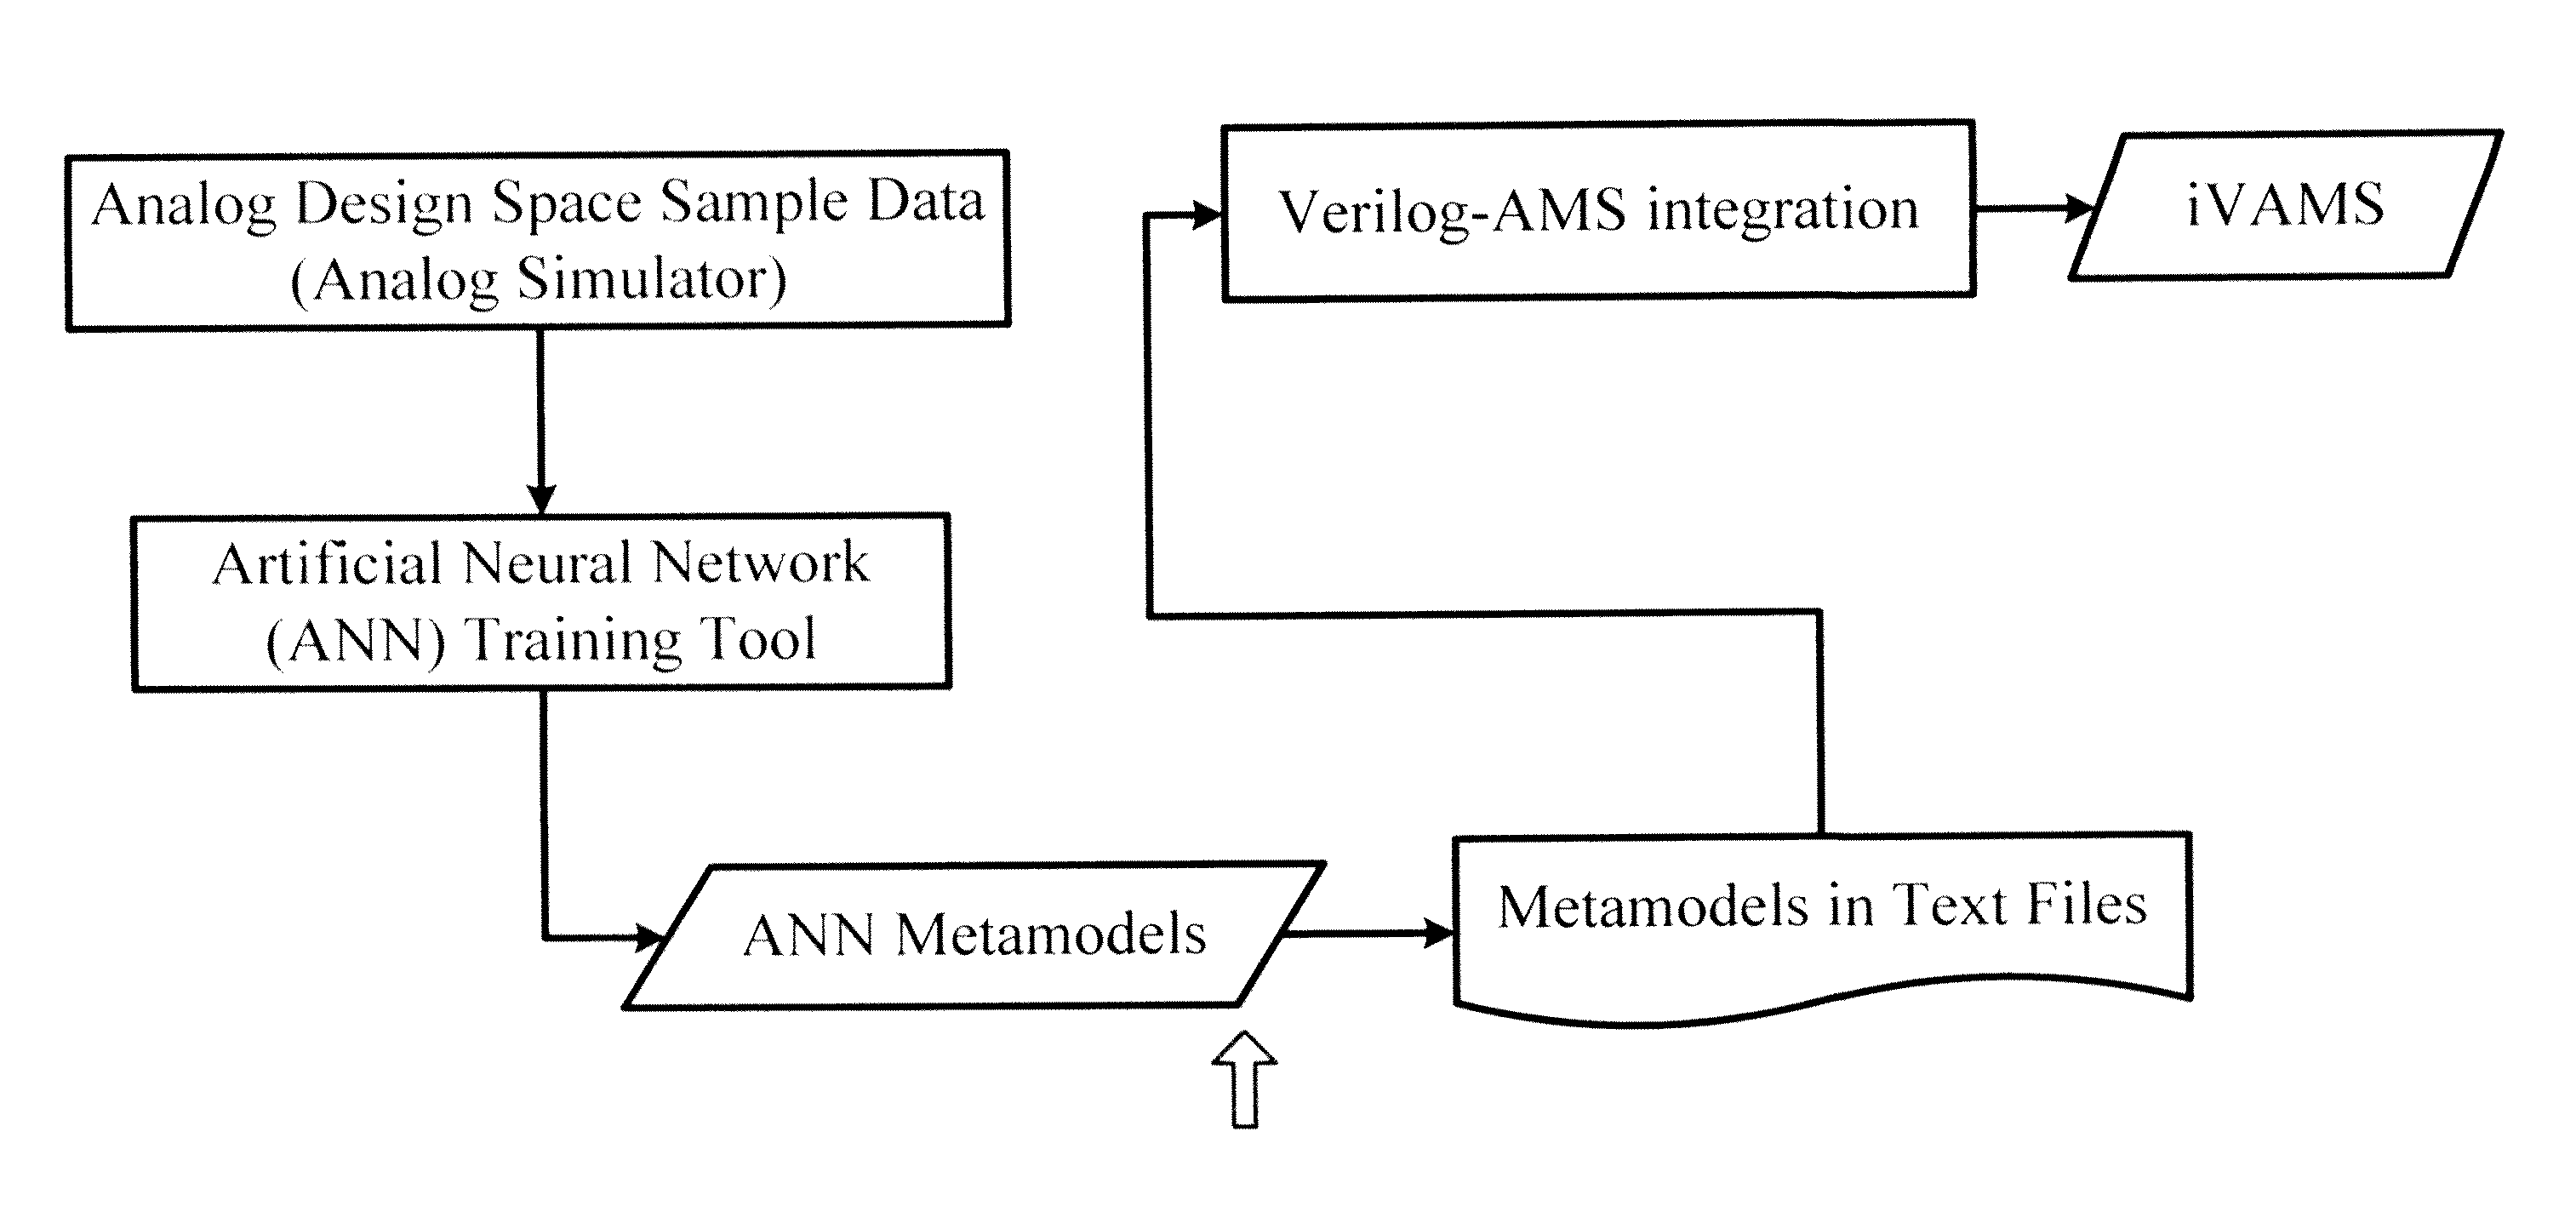 Intelligent metamodel integrated Verilog-AMS for fast and accurate analog block design exploration